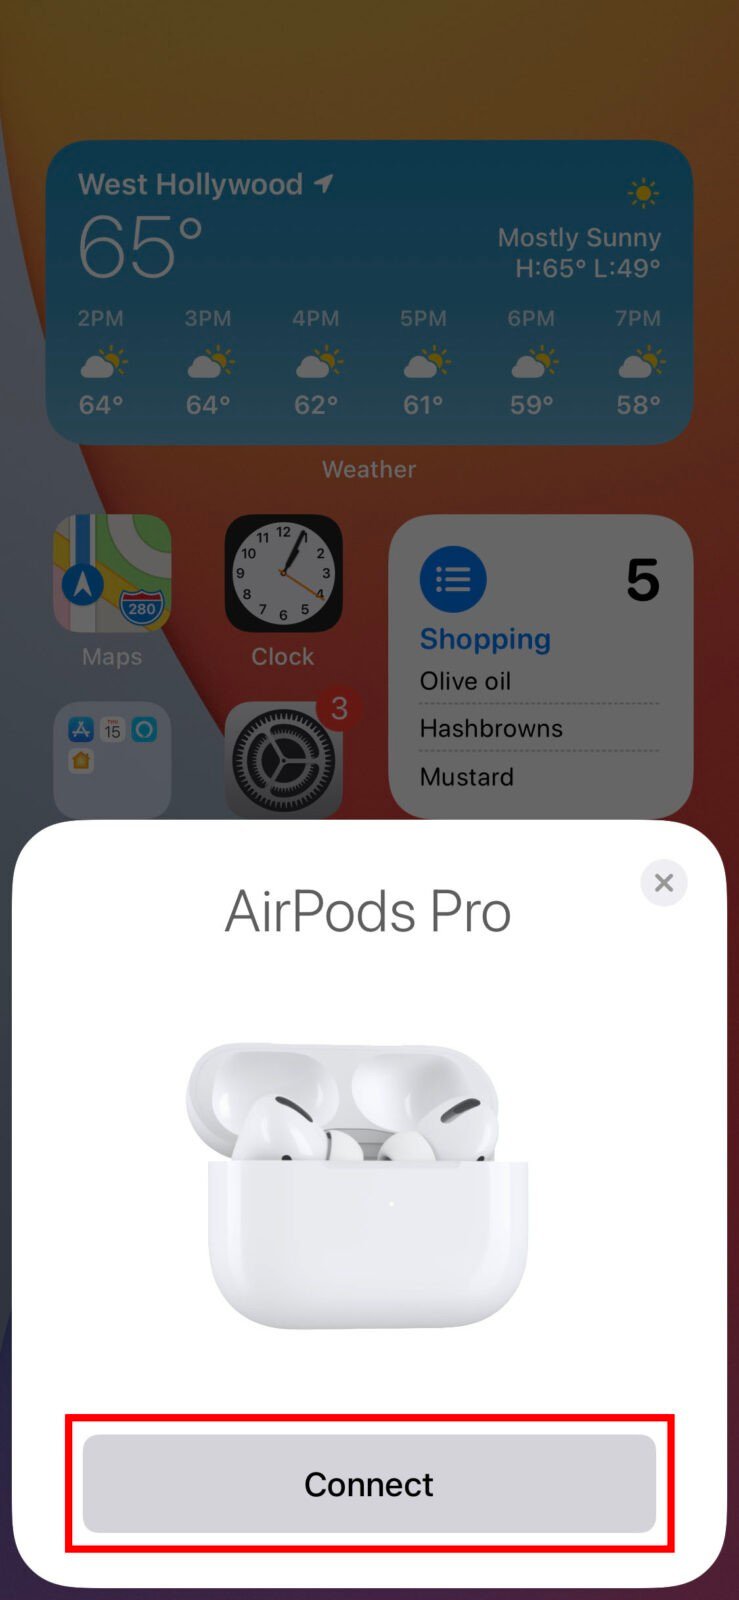 chrome autoplay video when airpods connect